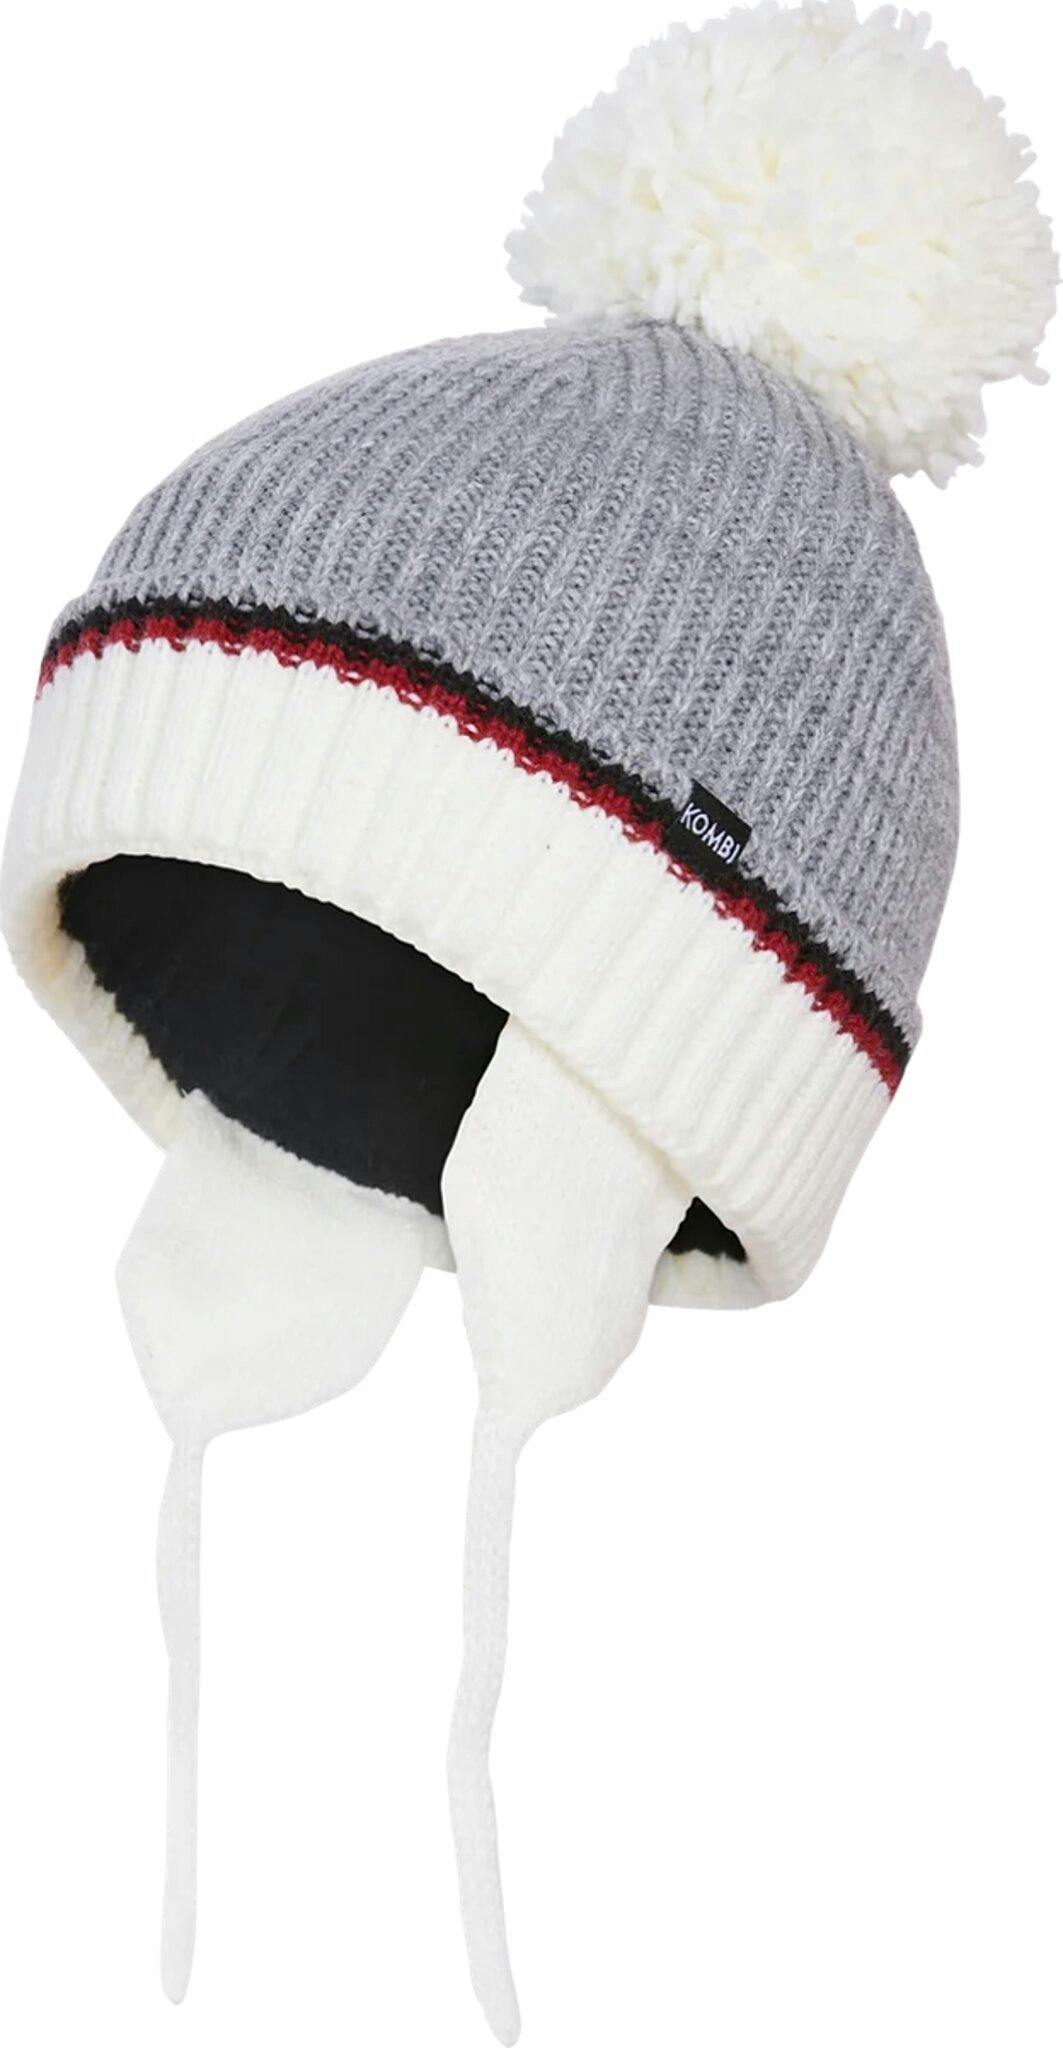 Product image for First Camp Toque - Infant